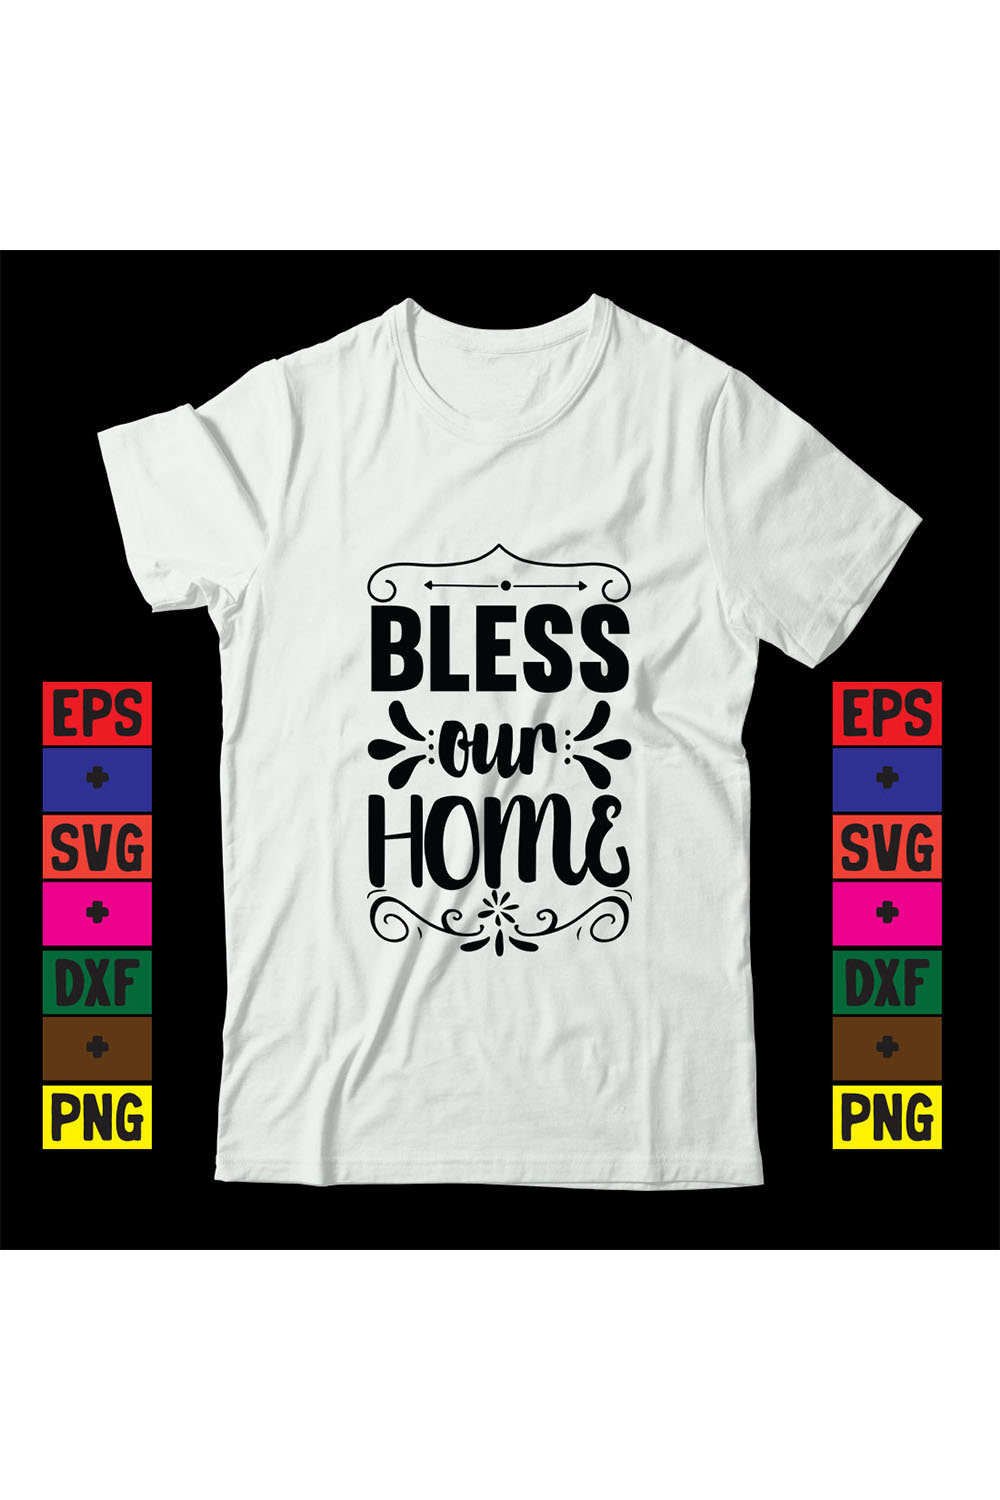 Bless our home pinterest preview image.